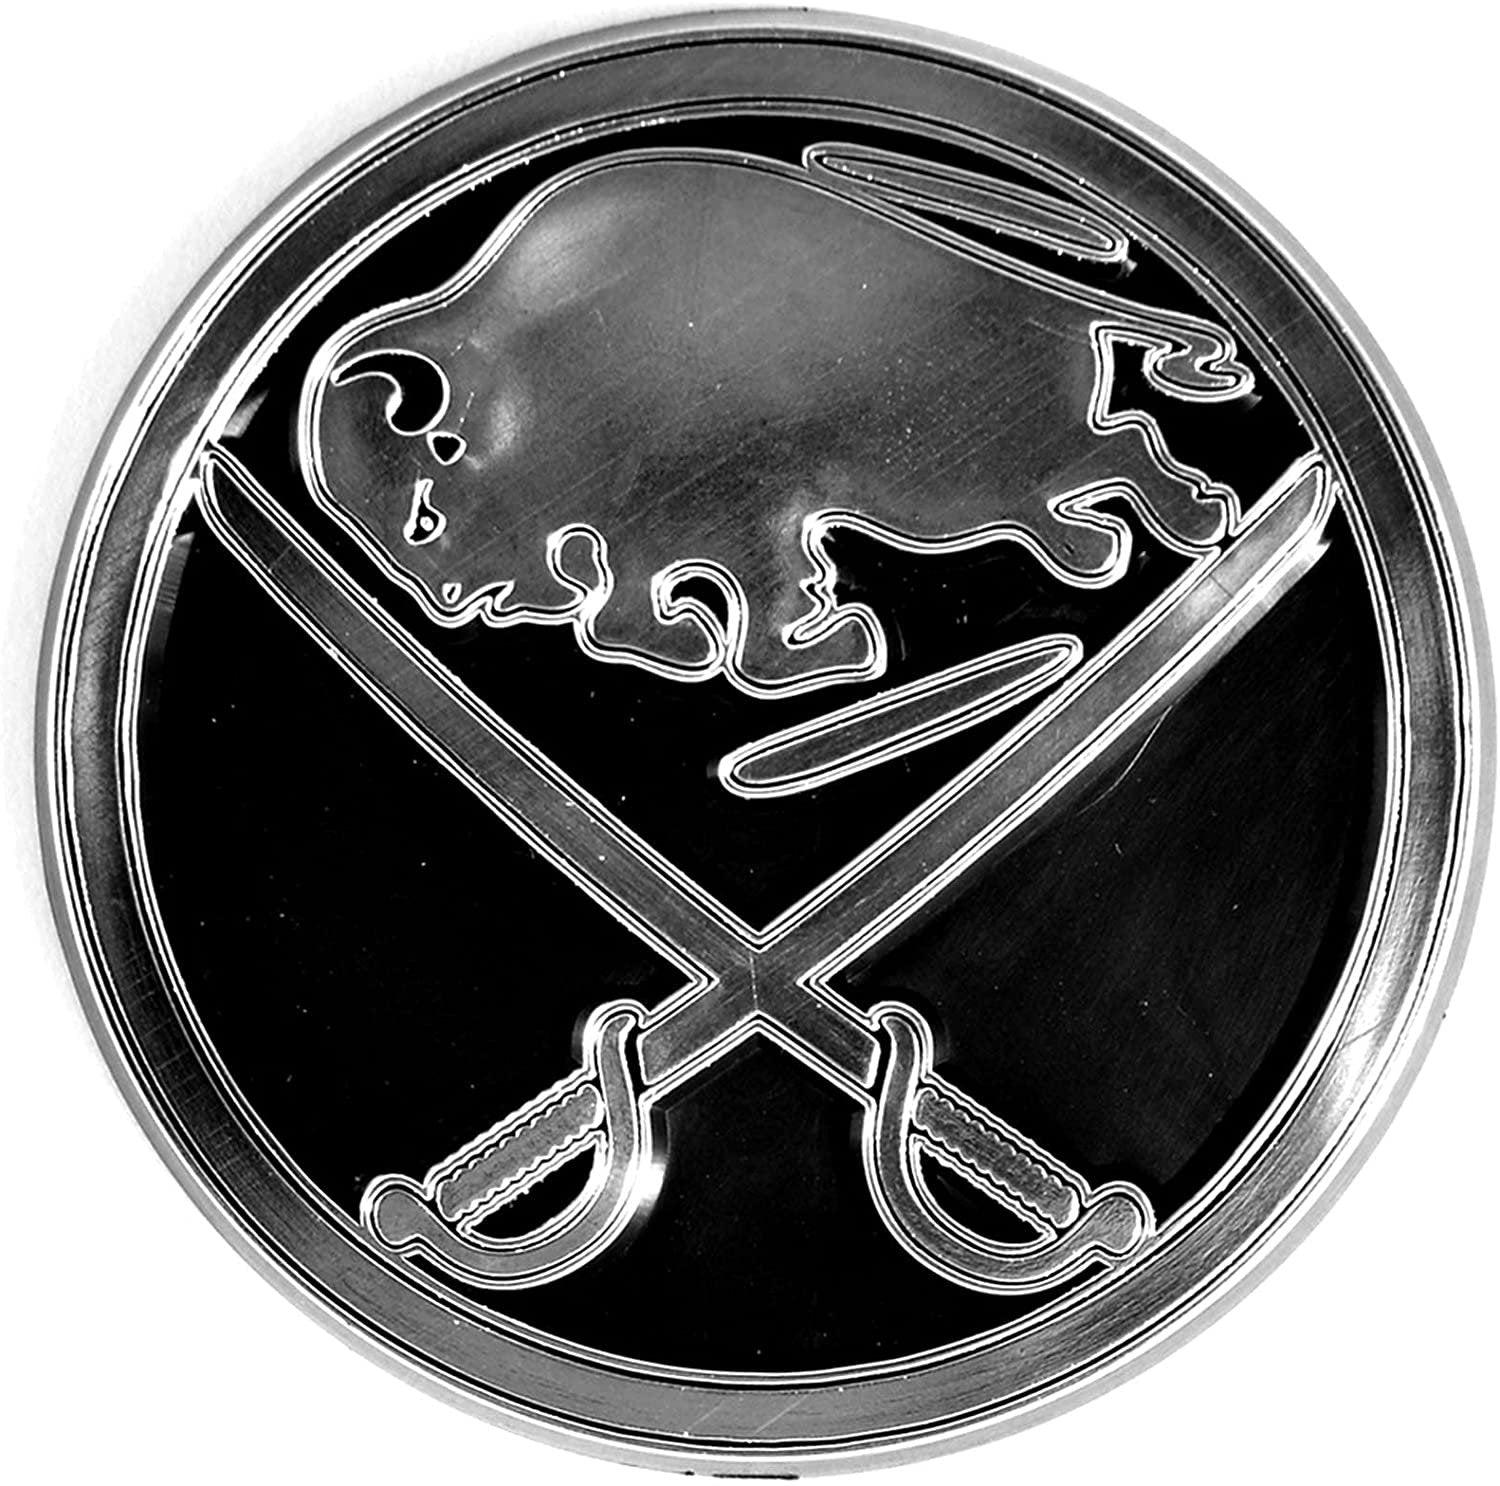 Buffalo Sabres Auto Emblem, Plastic Molded, Silver Chrome Color, Raised 3D Effect, Adhesive Backing